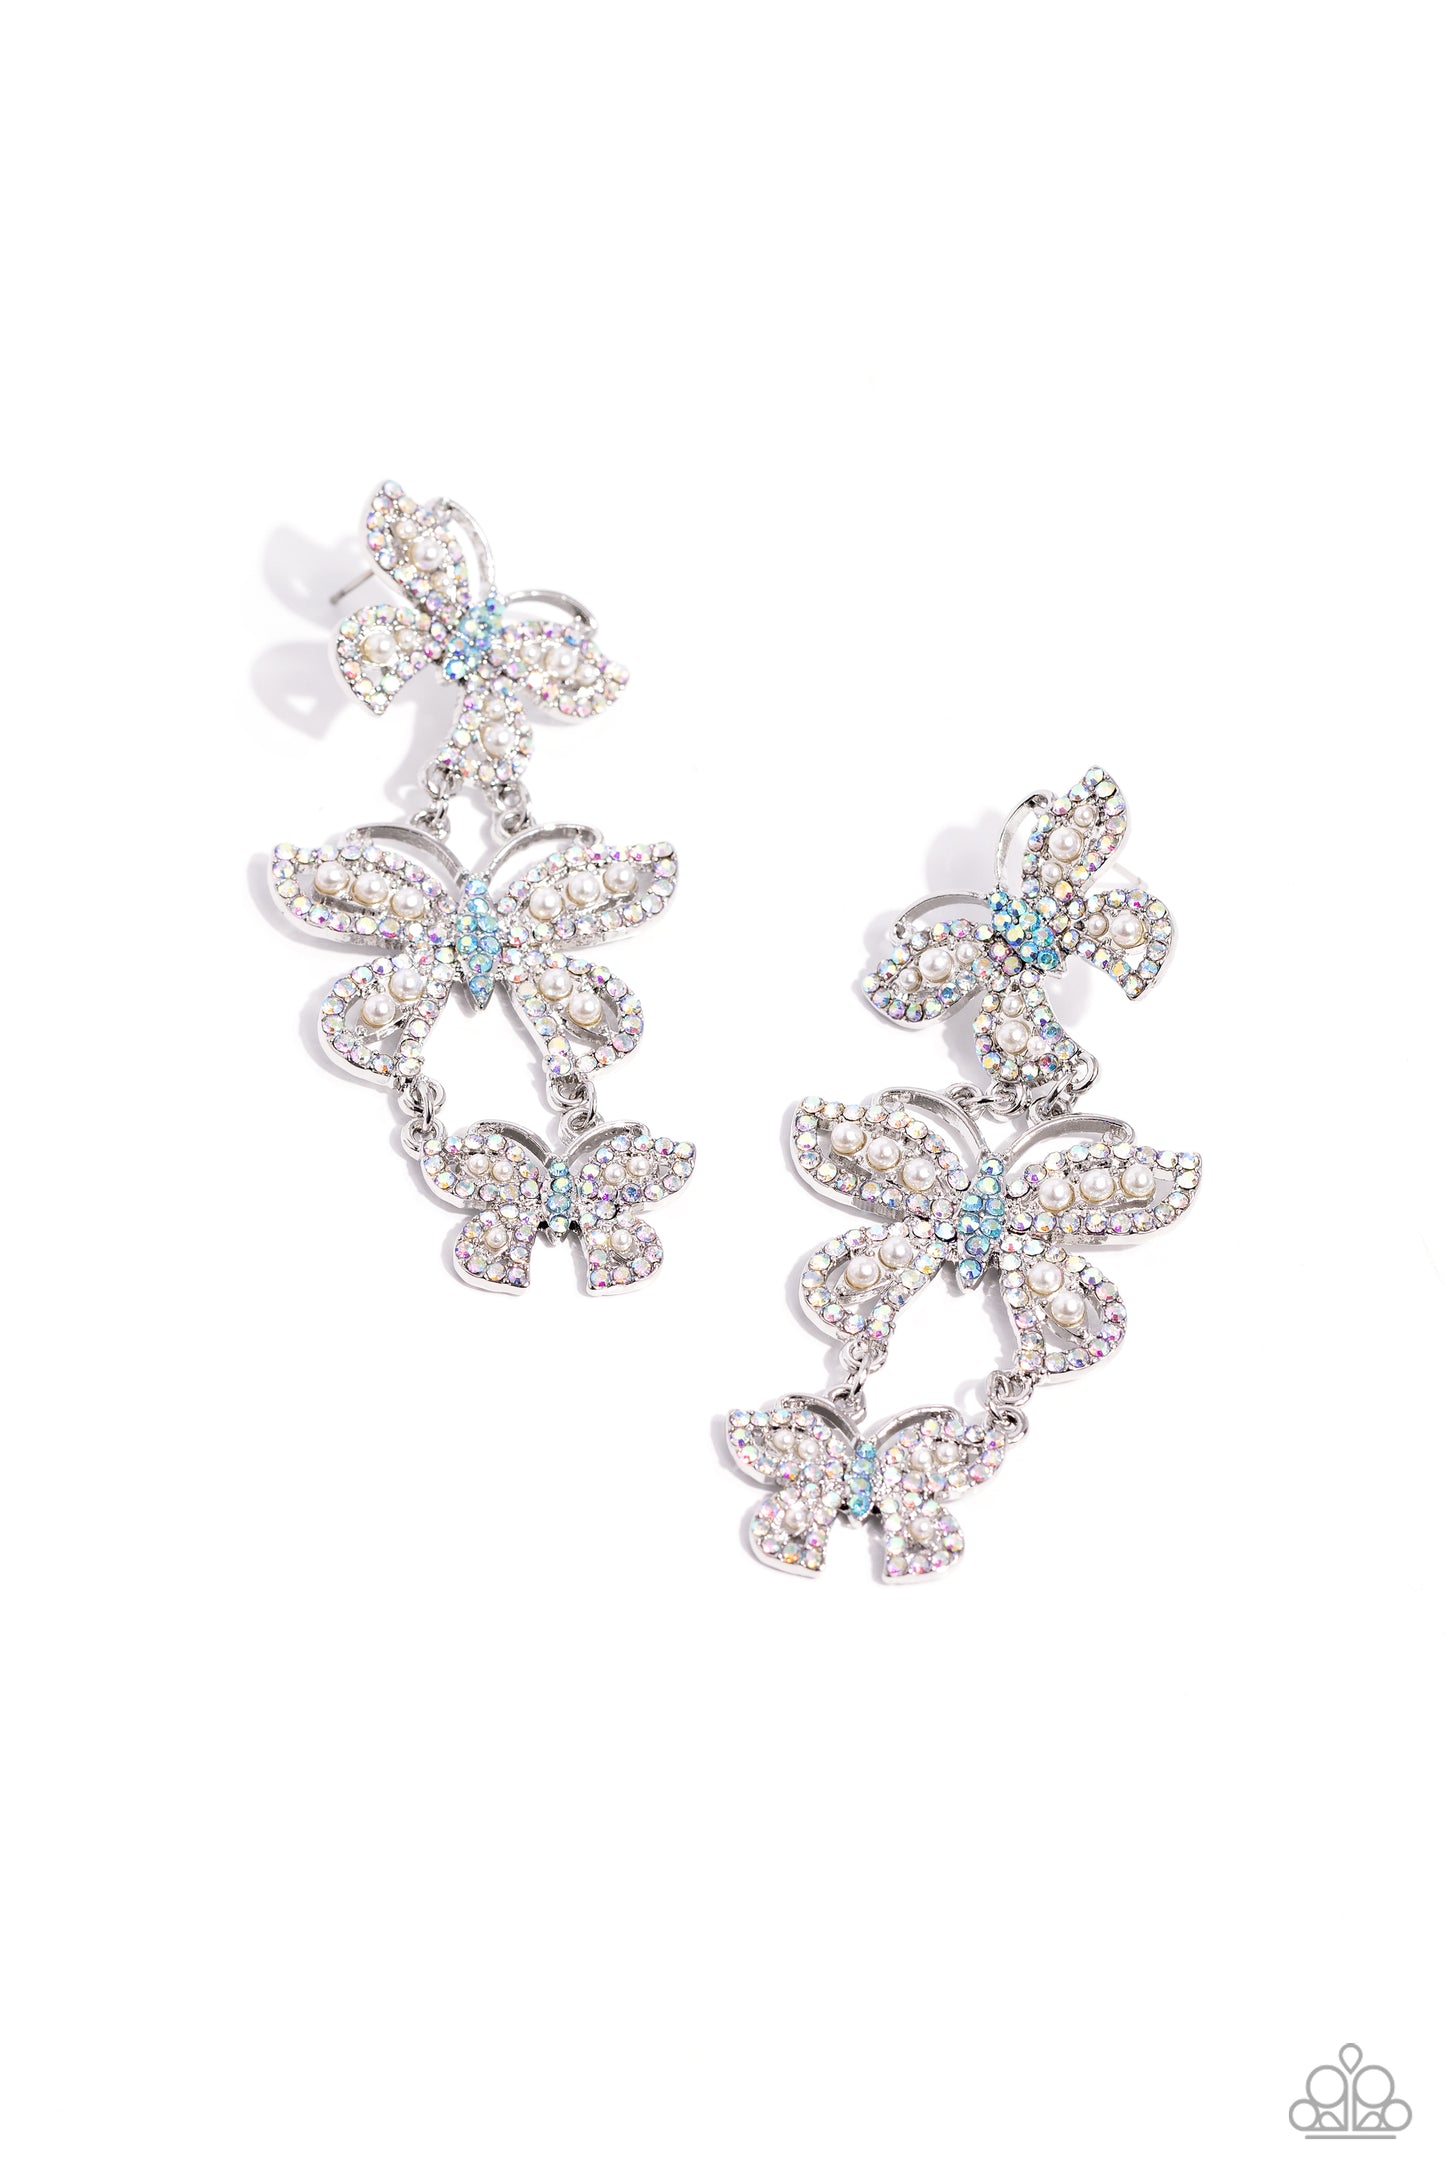 Fluttering Finale Multi Earrings Paparazzi Accessories. #P5PO-MTXX-112XX. Subscribe & Save